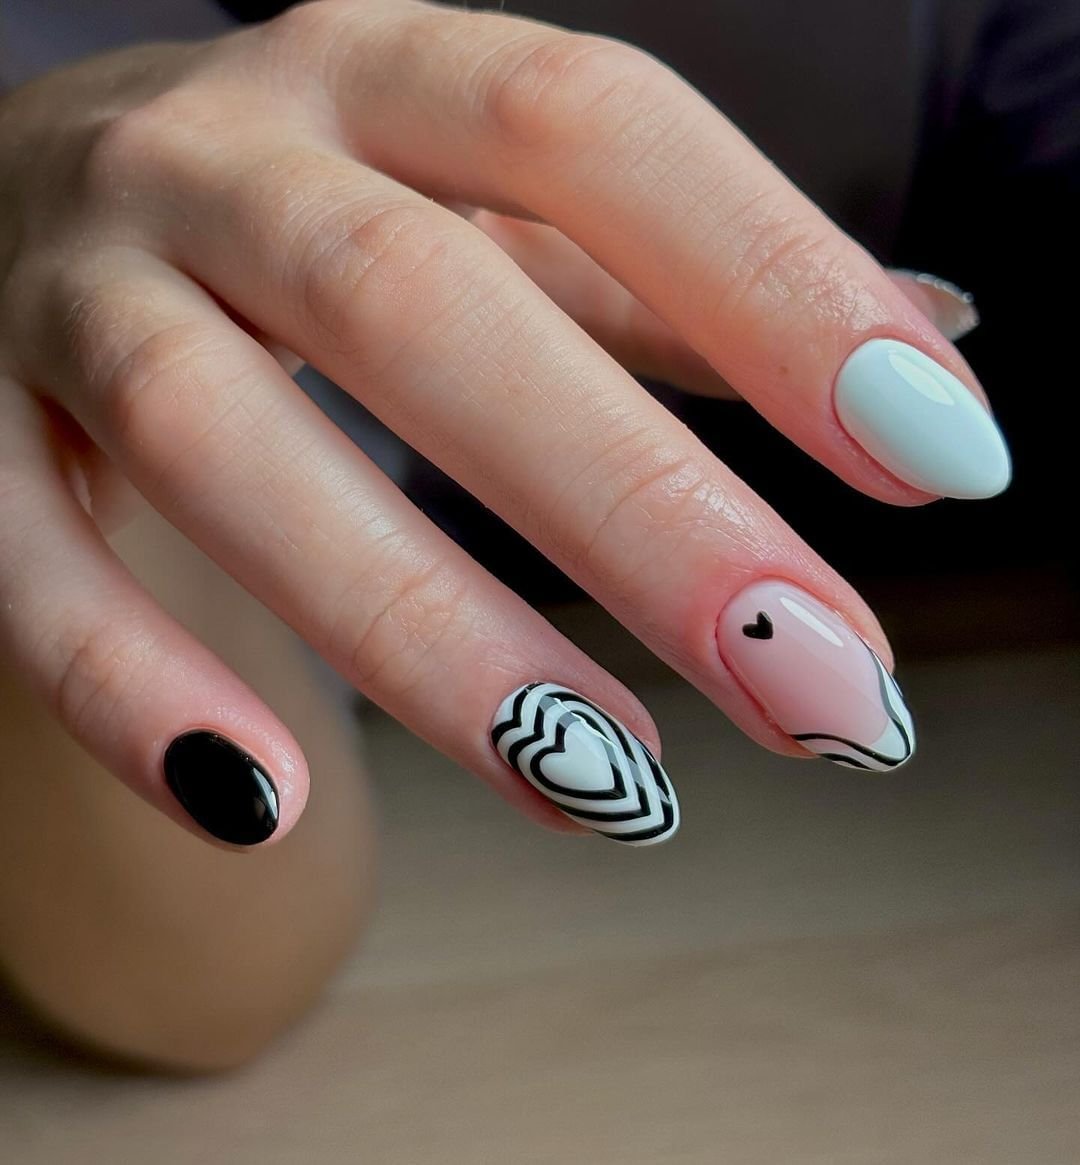 31 - Picture of Black and White Nails